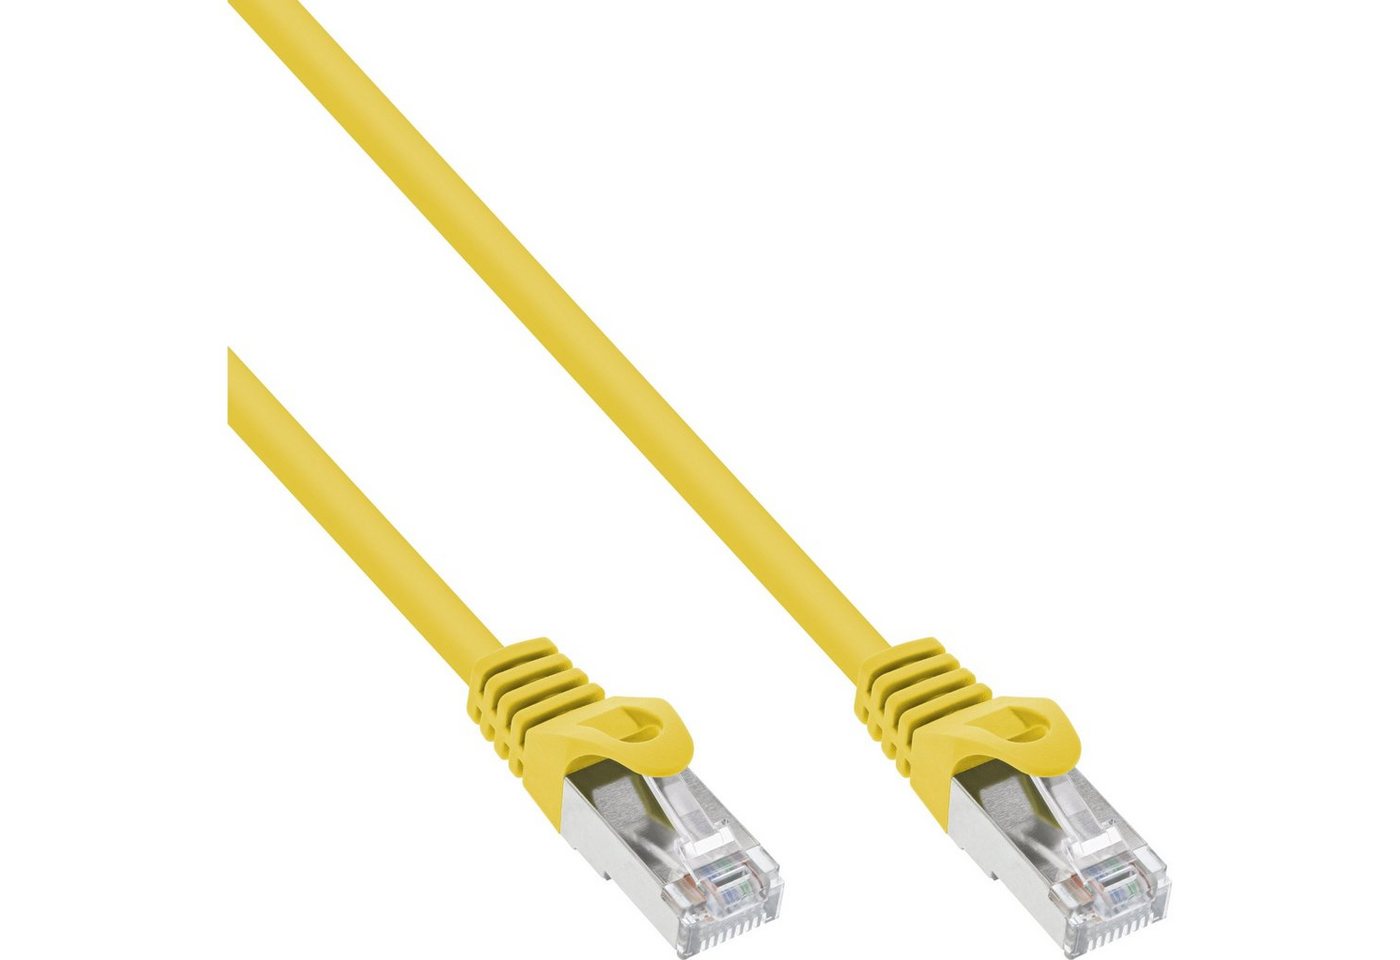 INTOS ELECTRONIC AG InLine® Patchkabel, F/UTP, Cat.5e, gelb, 1m LAN-Kabel von INTOS ELECTRONIC AG